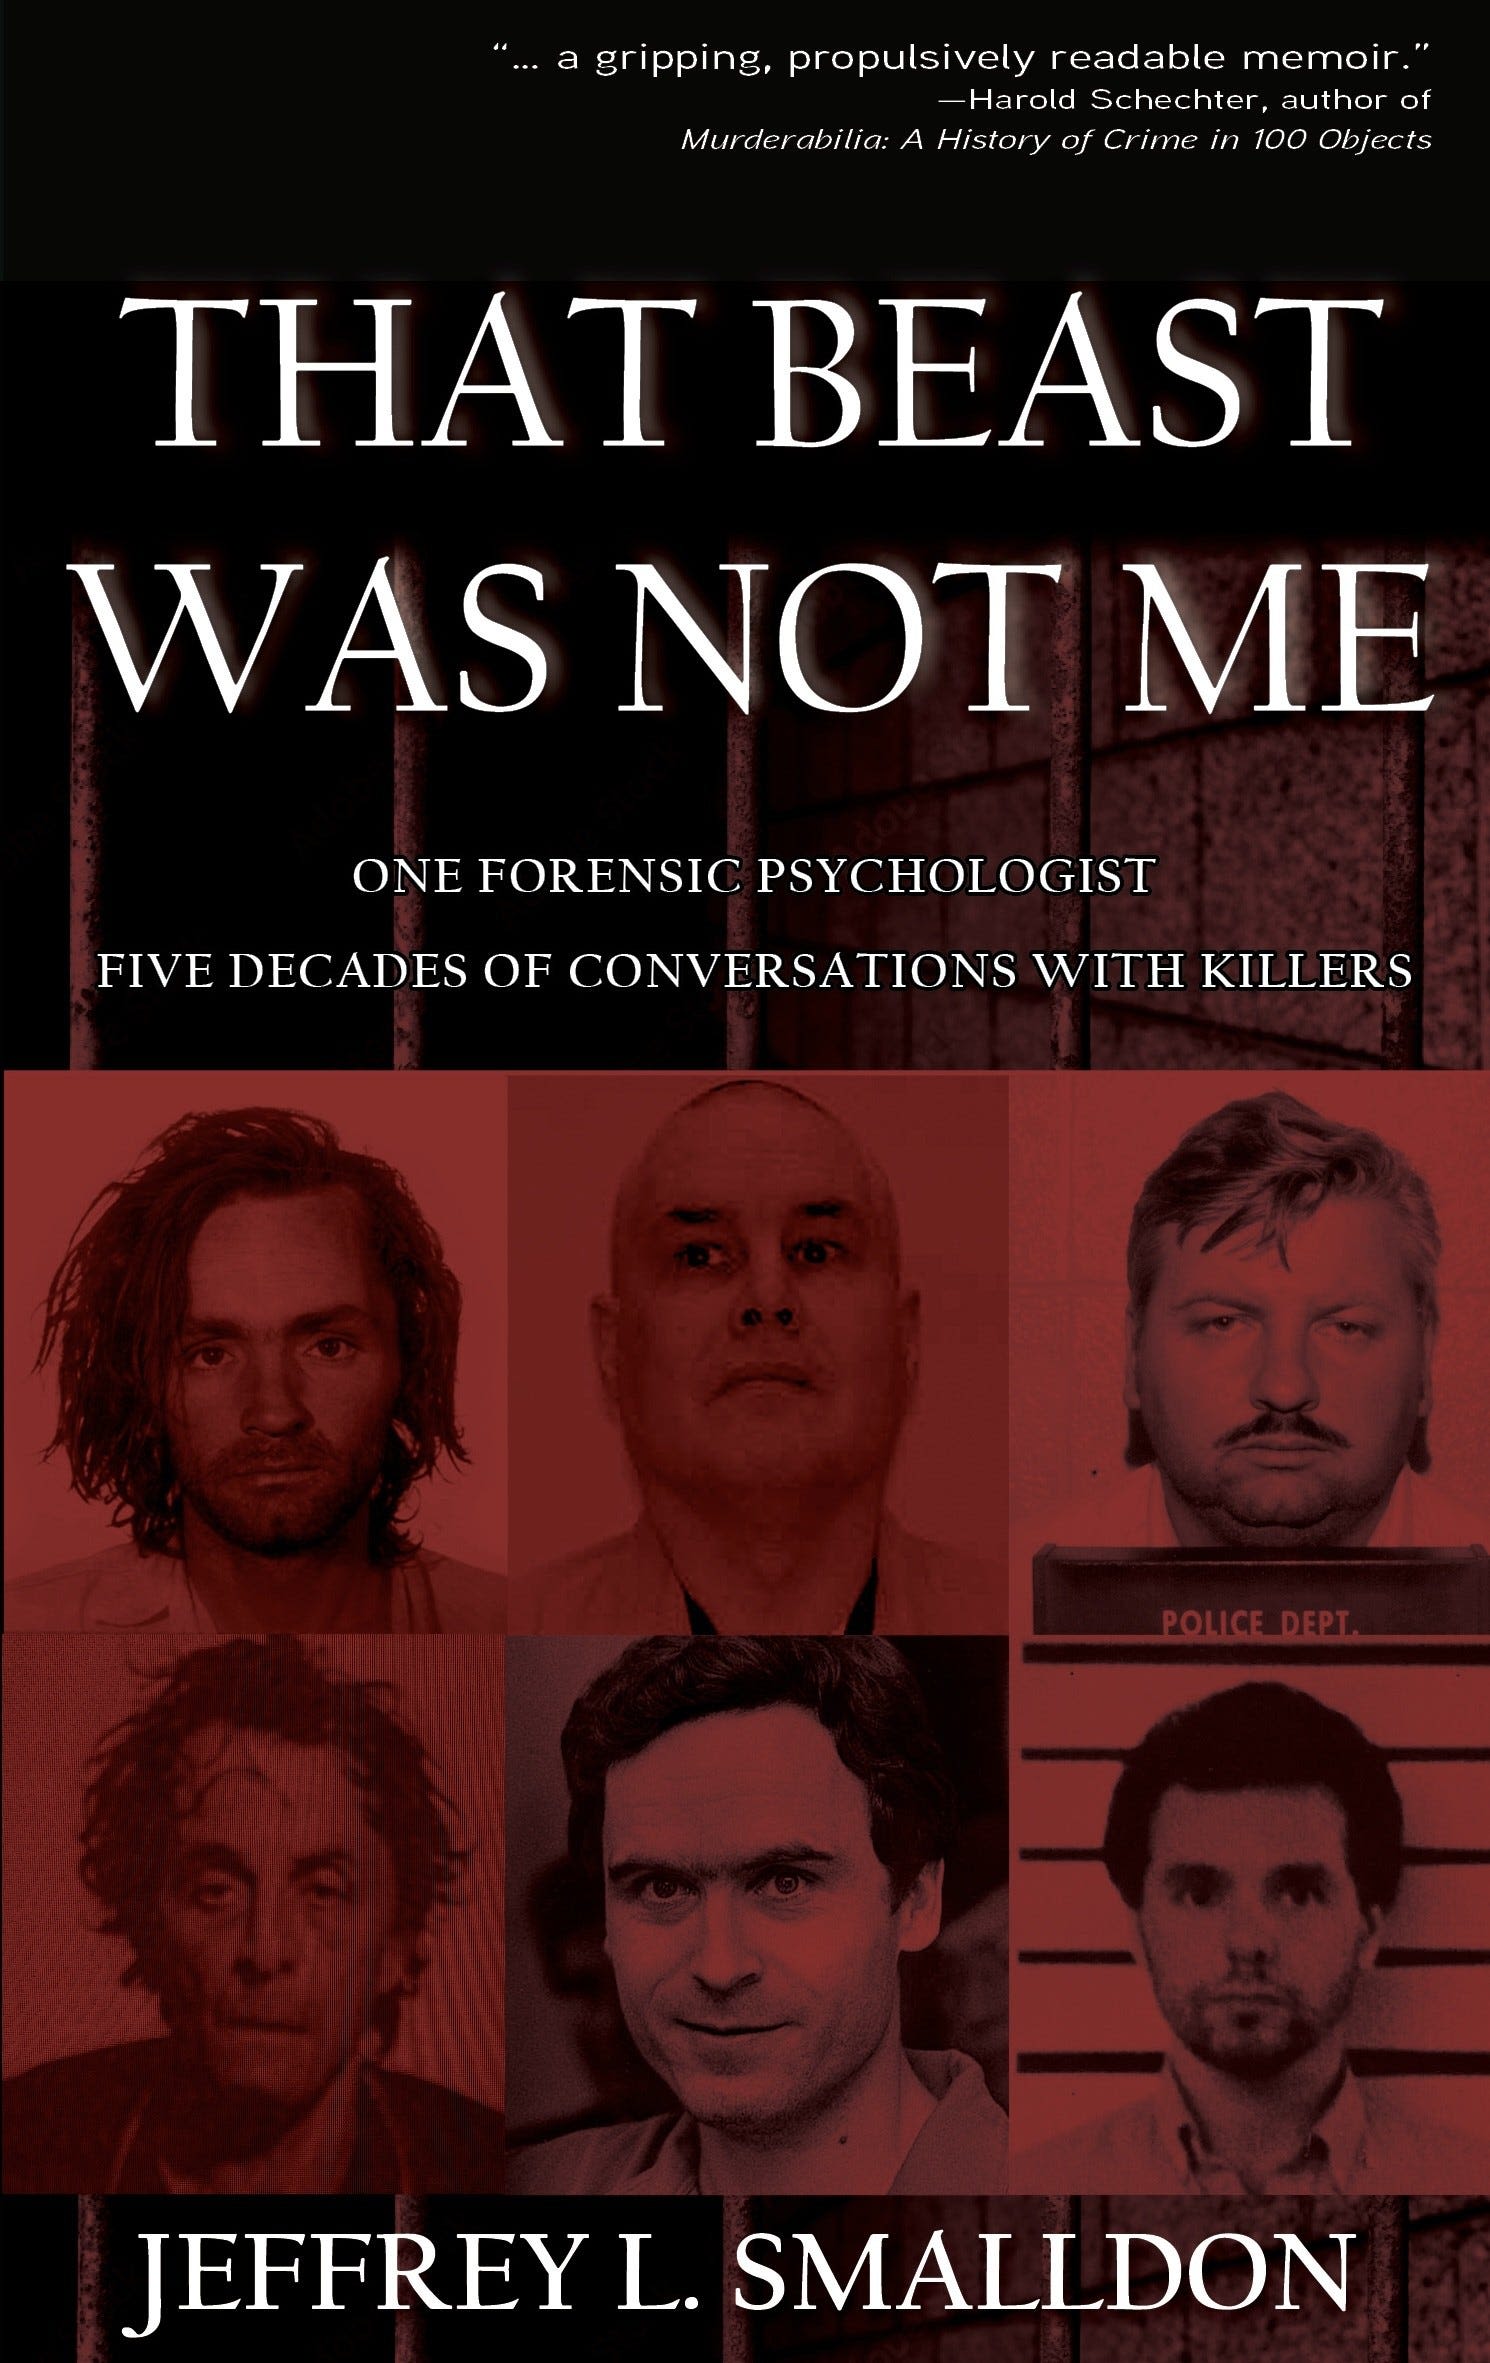 Letters from serial killers: Columbus author's new book is insight into killers' minds